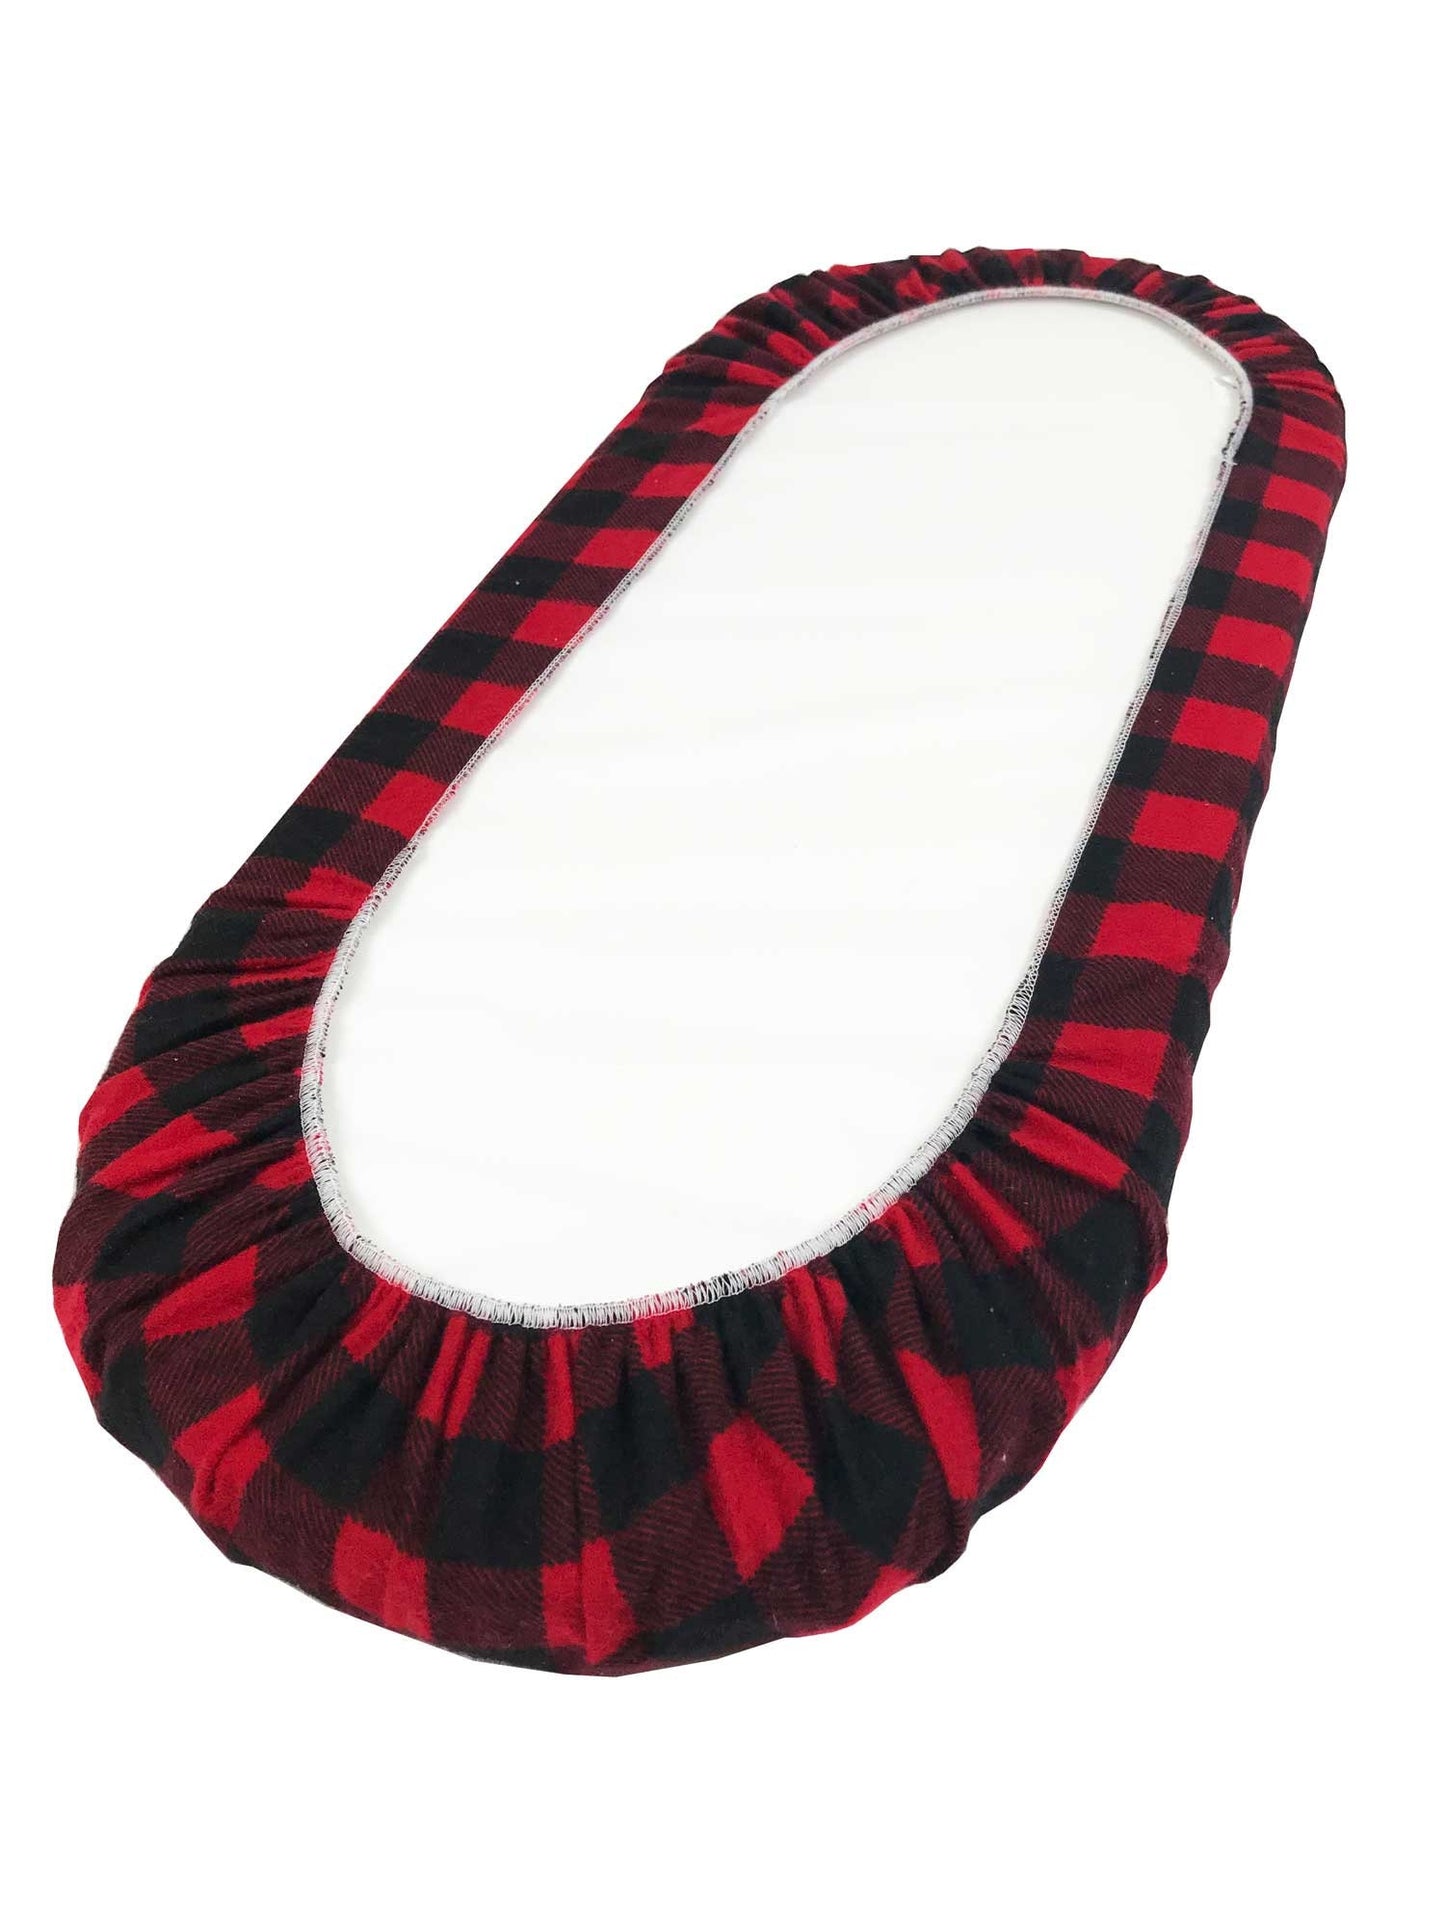 Buffalo Plaid in Red and Black Cotton - Custom Made Fitted Sheet